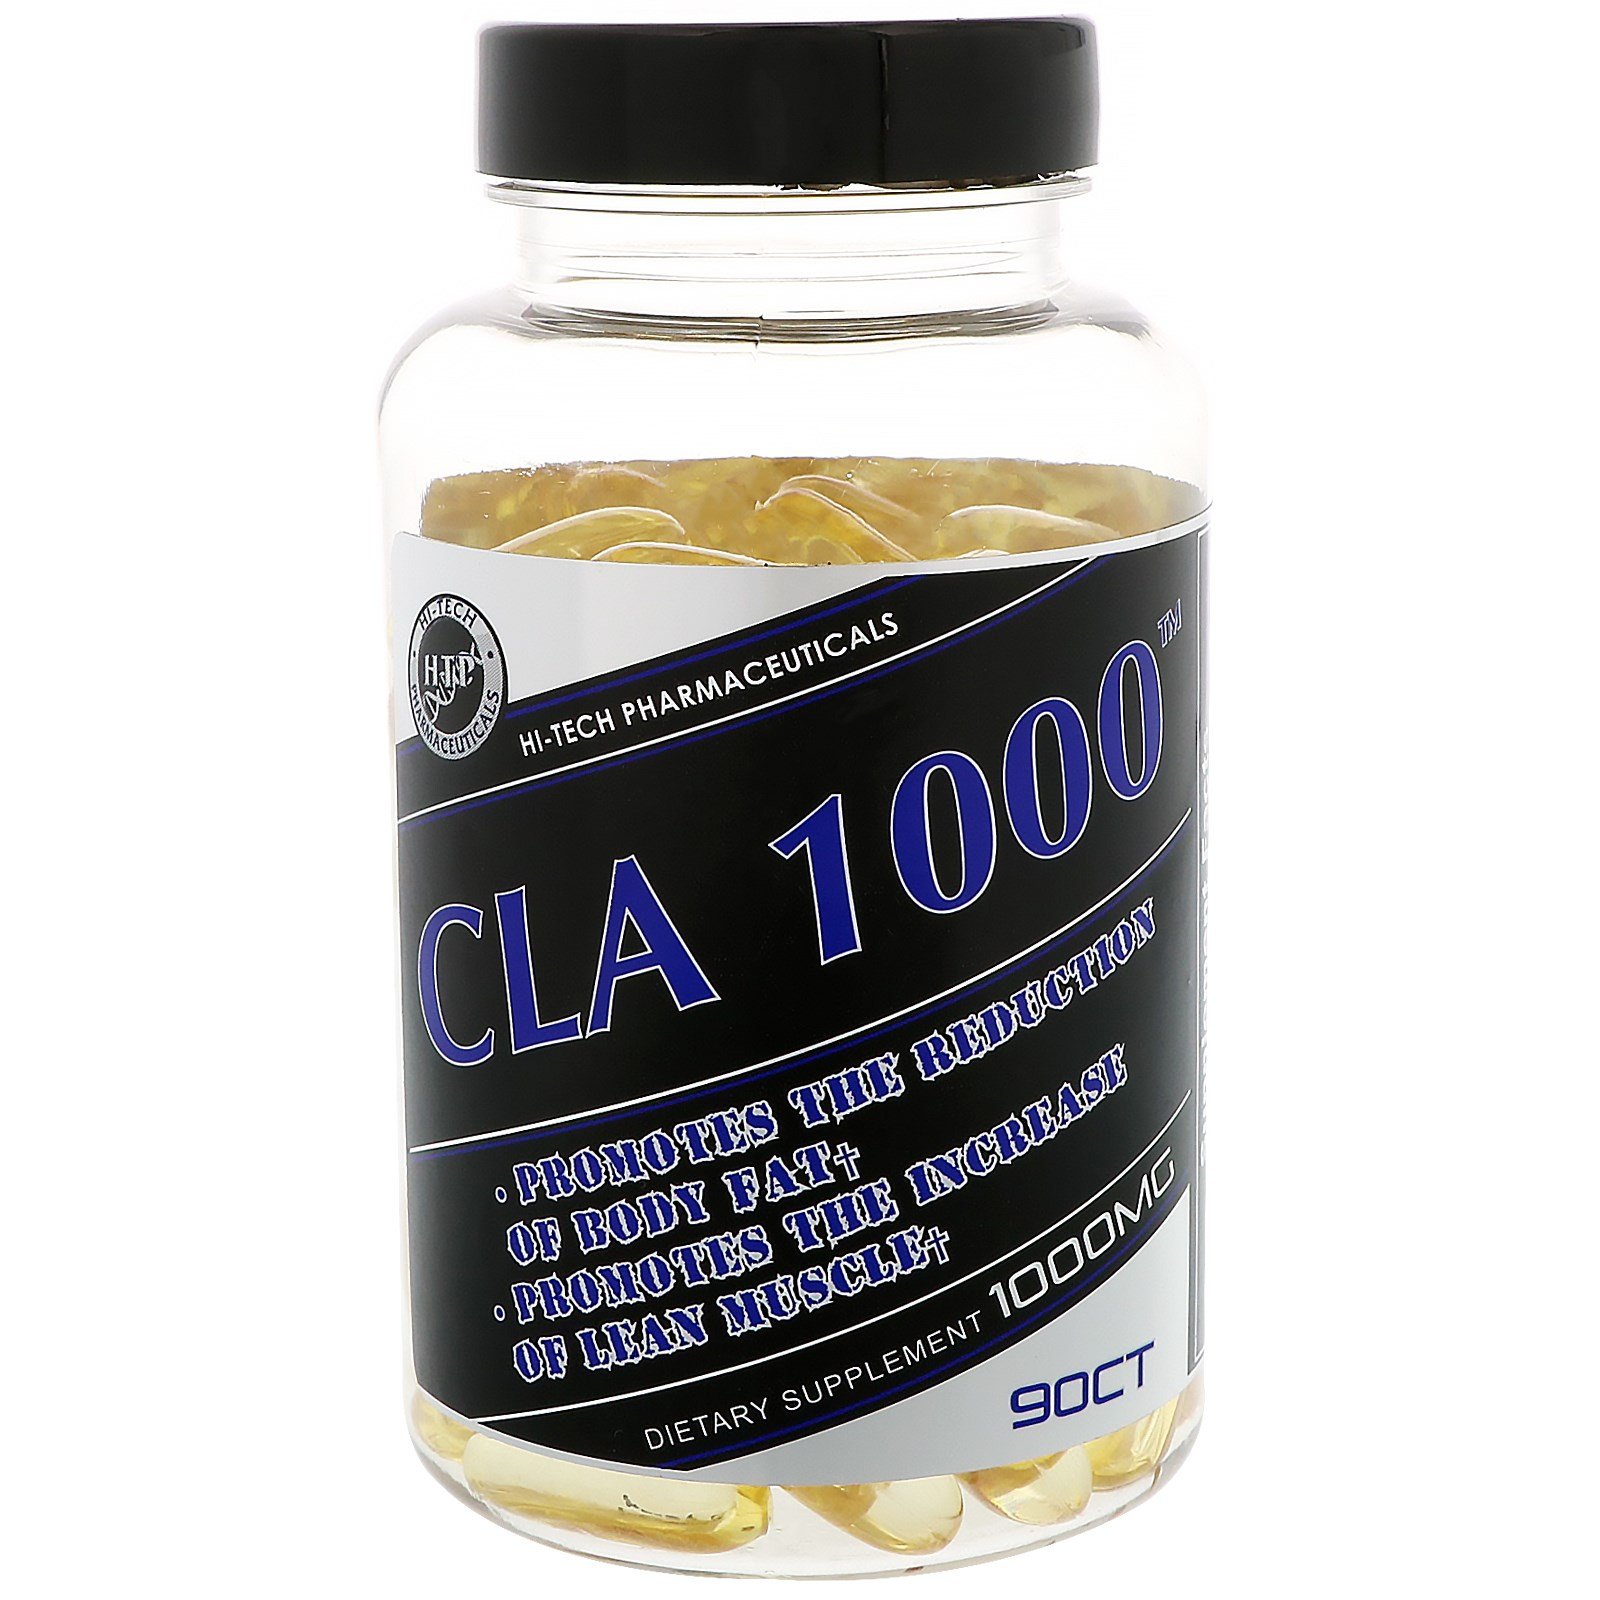 CLA 1000, 90 pcs, Hi-Tech Pharmaceuticals. Thermogenic. Weight Loss Fat burning 